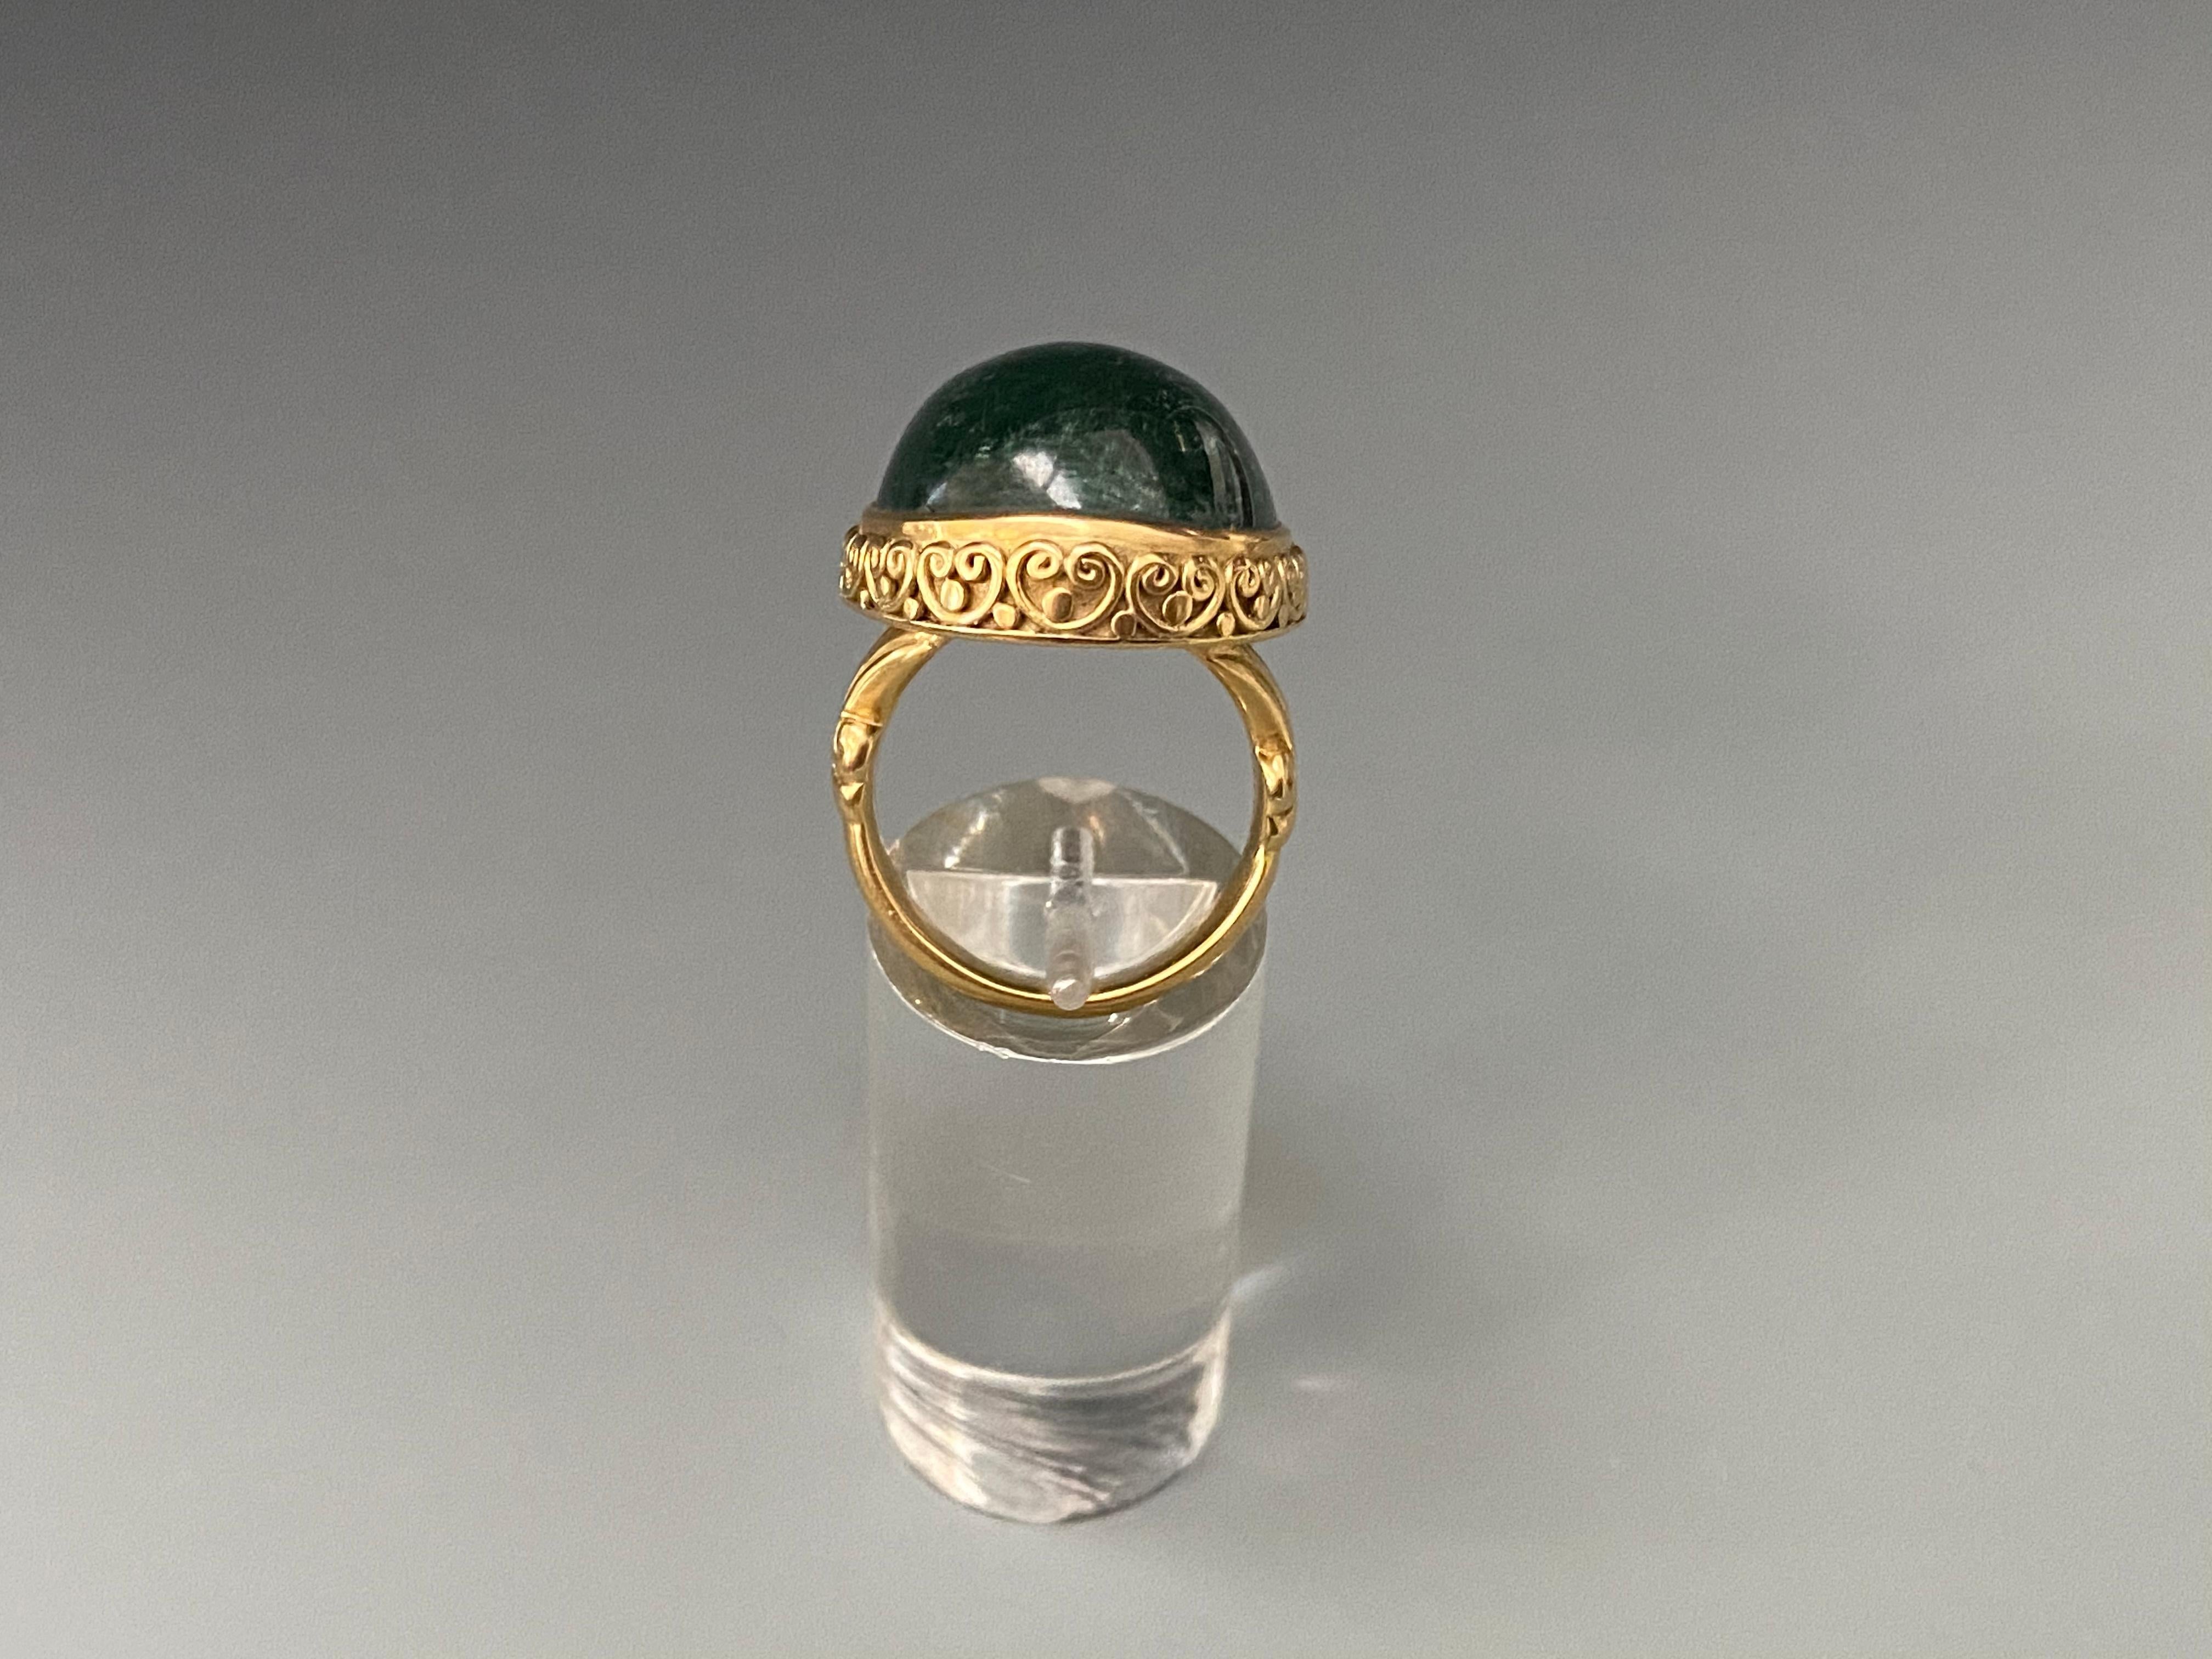 A large beautiful blue-green tourmaline oval cabochon accompanied with hand soldered delicate spiral bezel accents will be an object of admiration for the owner of this ring.   Currently size 7, but can be resized.  The stone is approximately